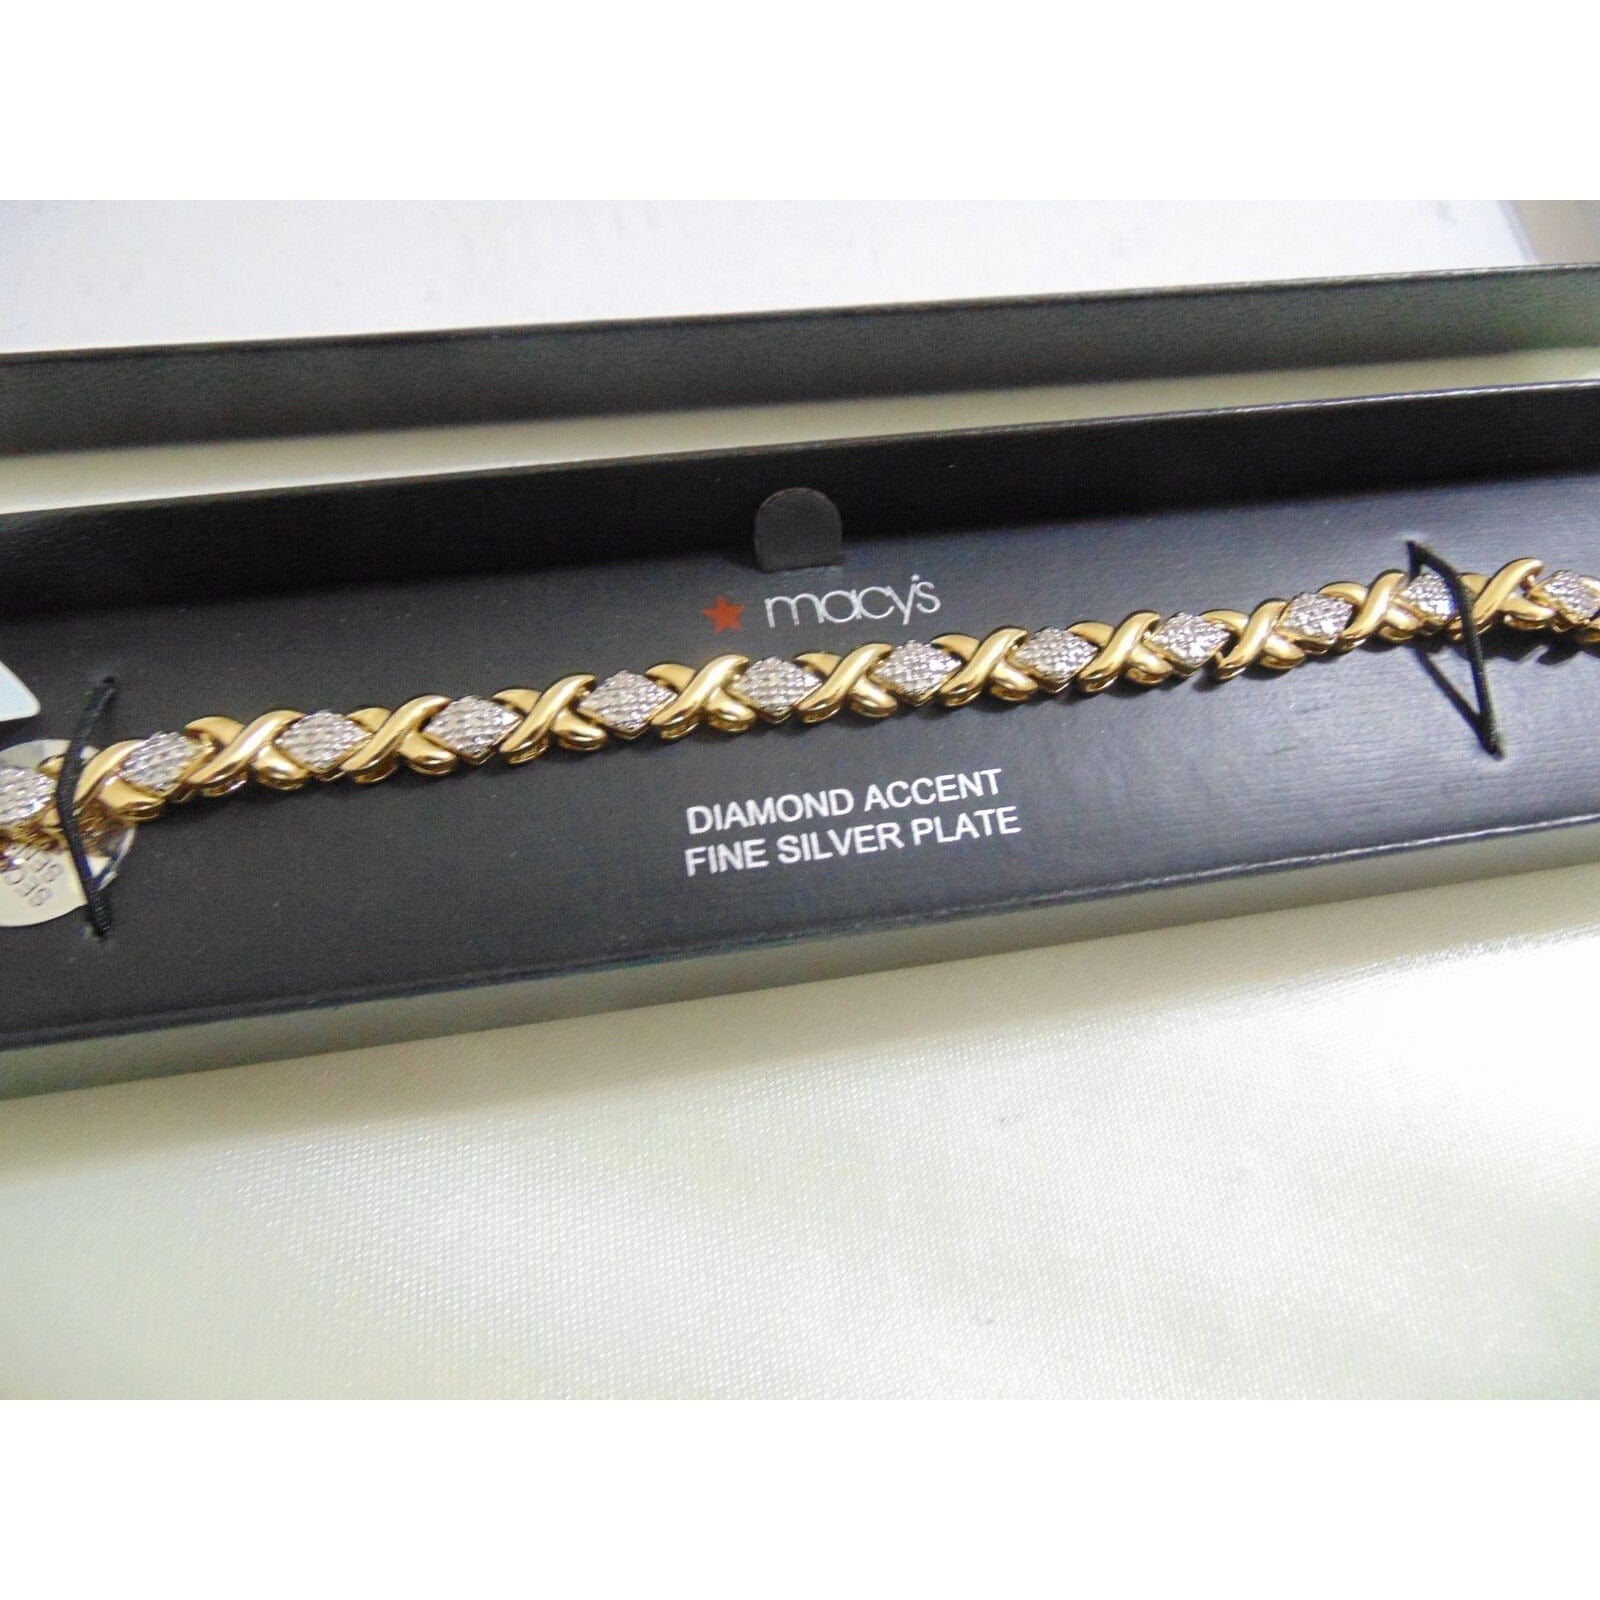 Diamond Accent X Link Bracelet in Gold Over Fine Silver-Plate - The Pink Pigs, A Compassionate Boutique